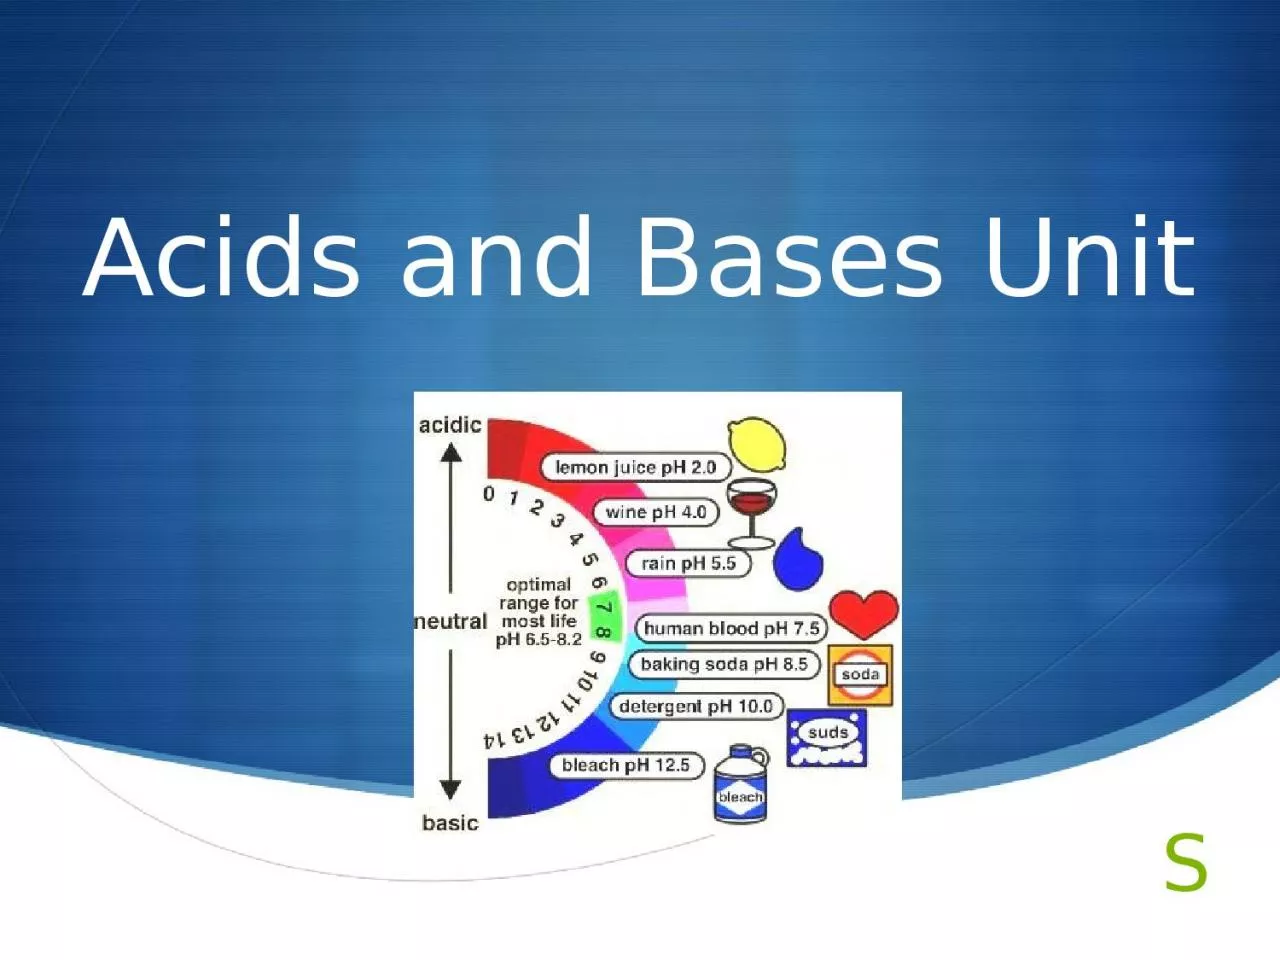 Acids and Bases Unit What is an Acid?